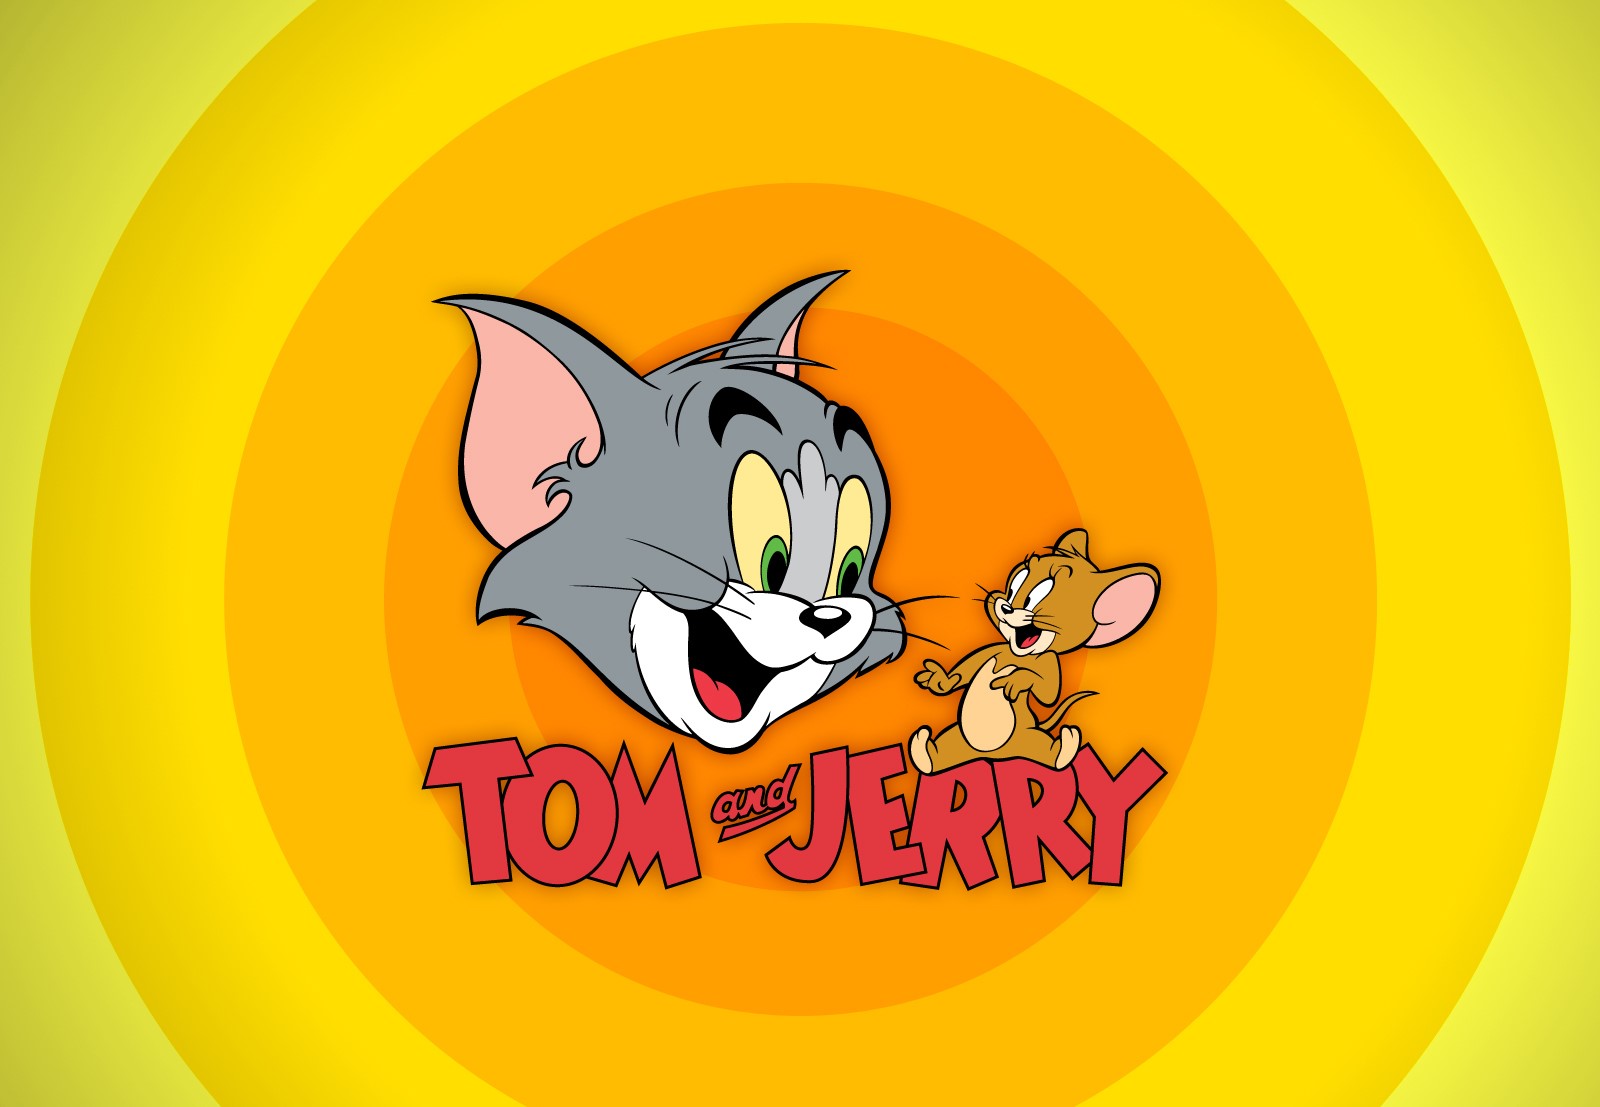 Are Tom and Jerry best friends